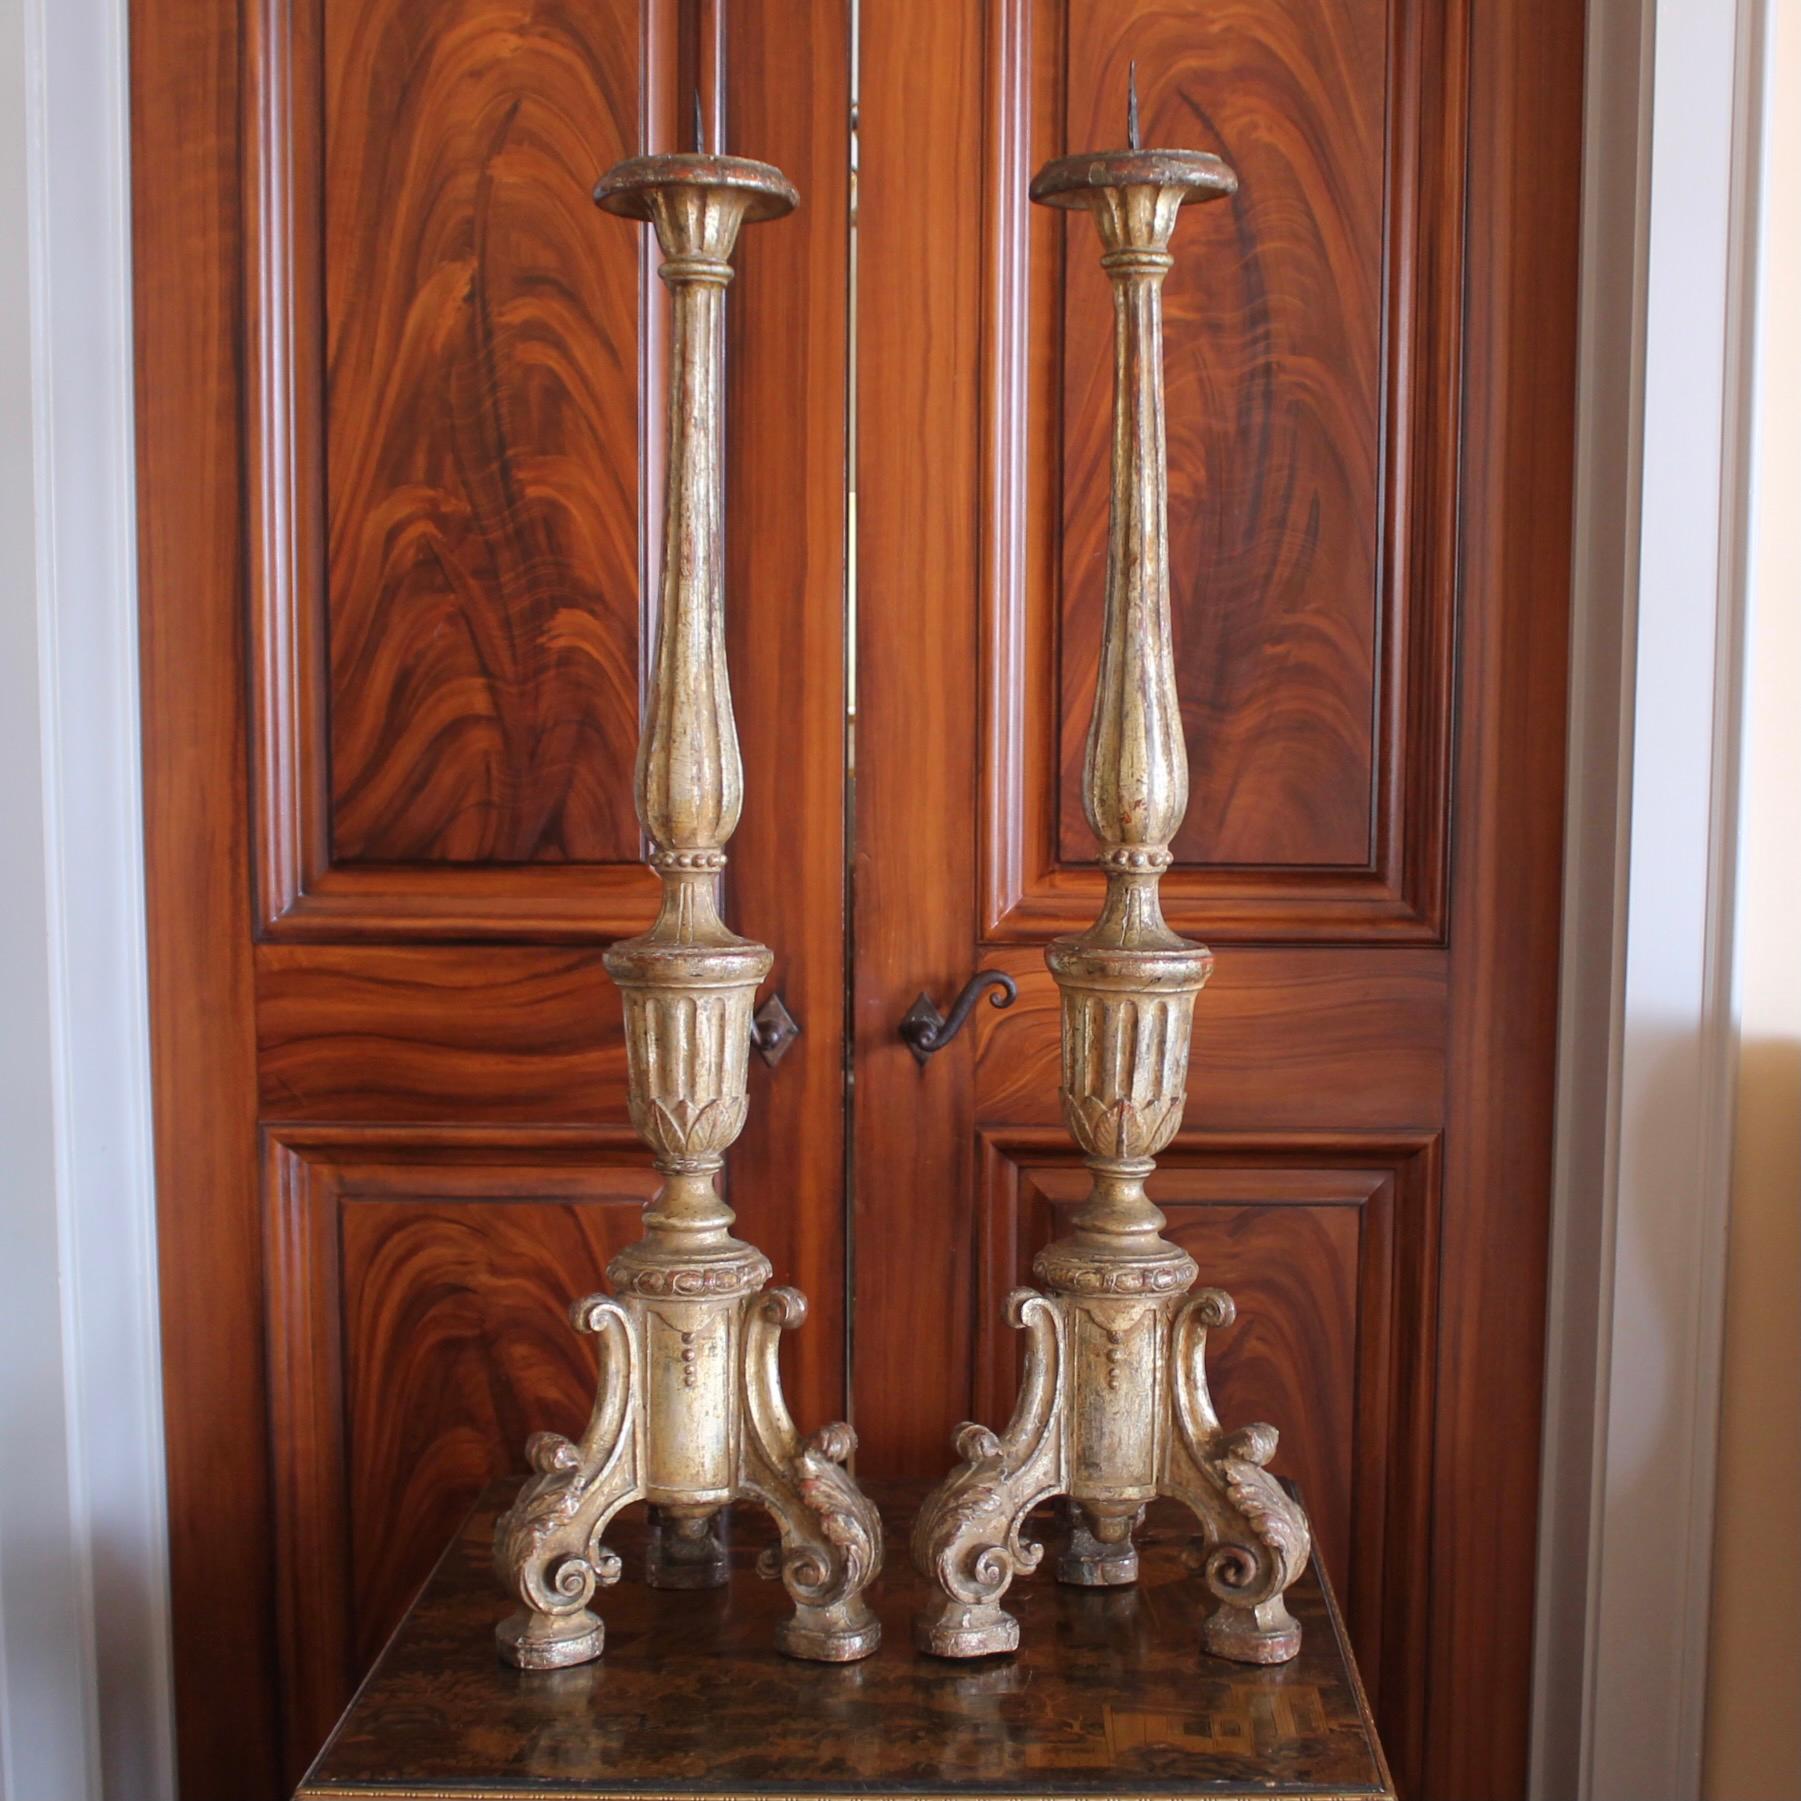 A fine pair of 18th century tripodal prickets with bold fully three dimensional feet forming the base, each supporting a fluted baluster terminating in the flared flat top. Lovely details such as the finley scrolled feet, gadroon carving and